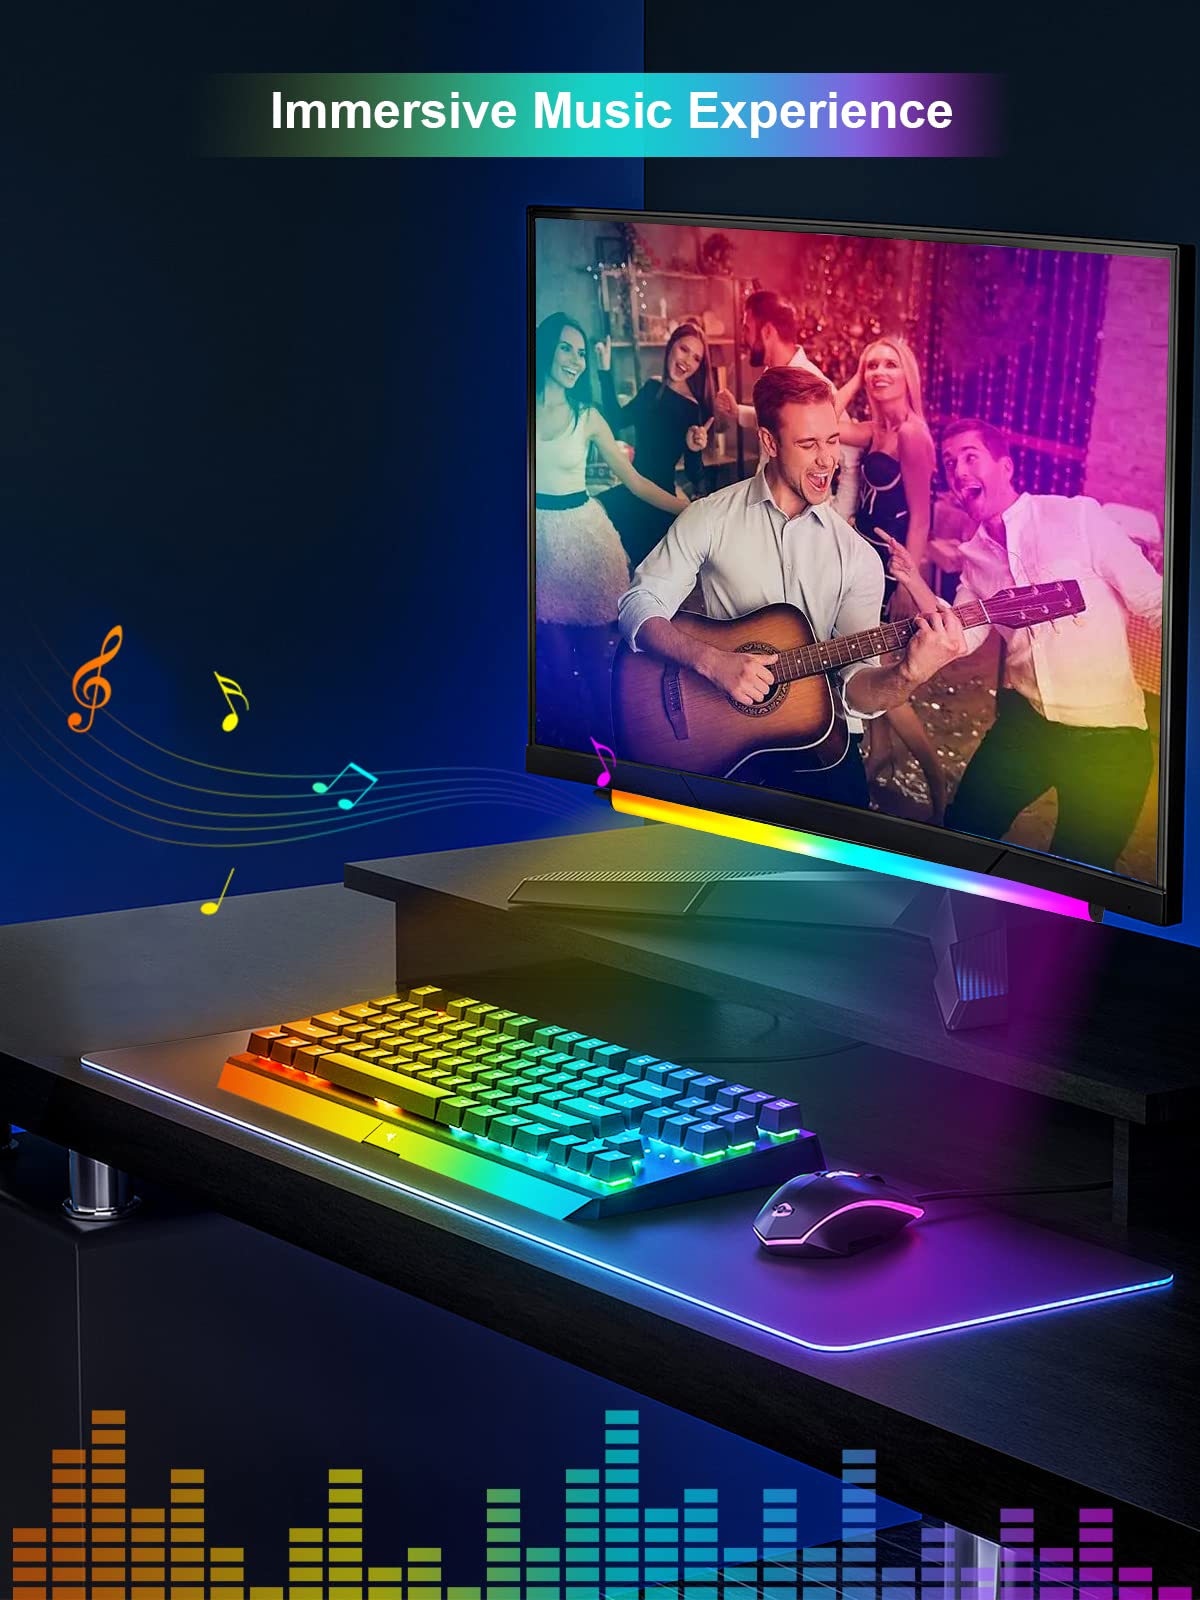 KANTUTOE Monitor Down Light Bar, RGB Screen Desk Light PC, Dimmable LED Dynamic Rainbow Effect, Adjustable Brightness, Speed and Music, Remote Control Color Change, for Game Room